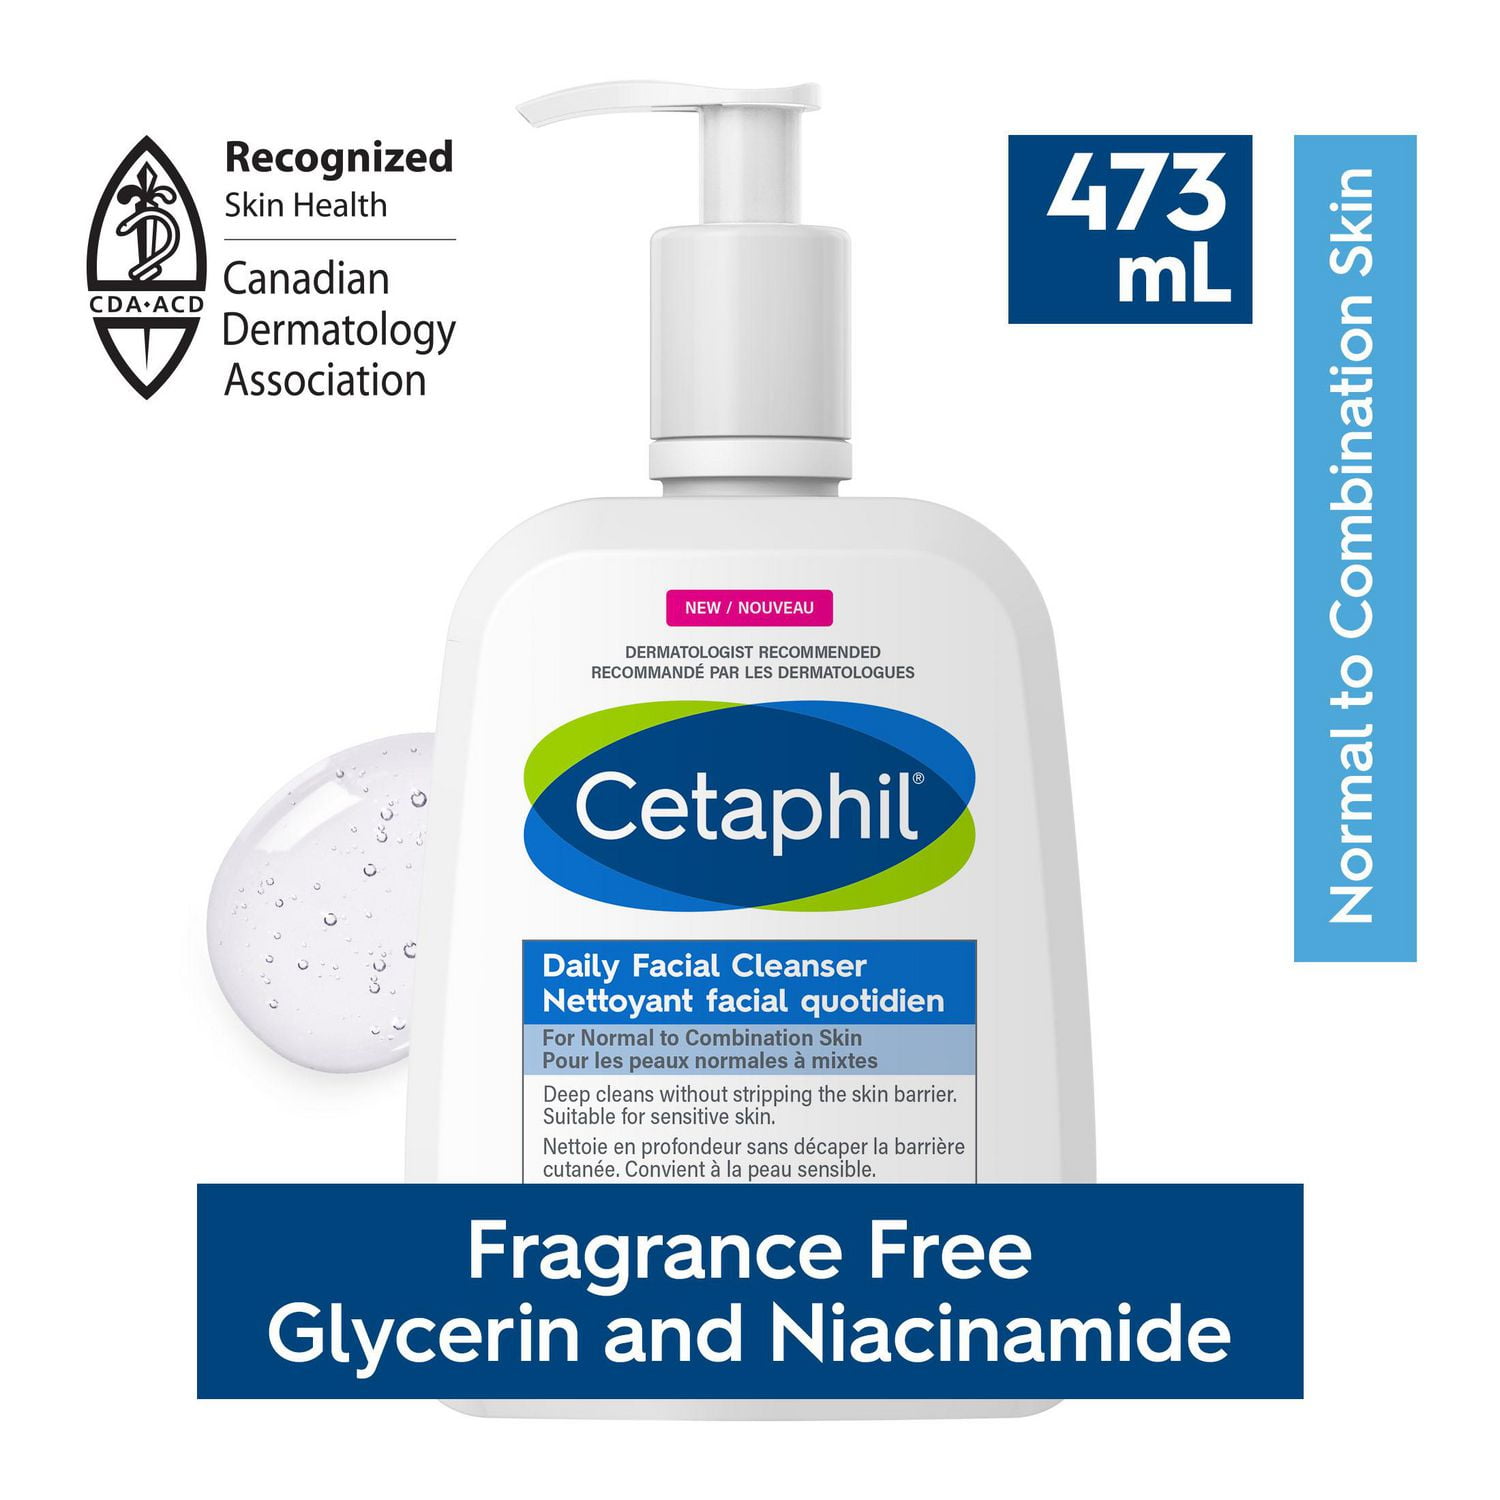 Cetaphil Daily Facial Cleanser, Fragrance Free, 473ml 